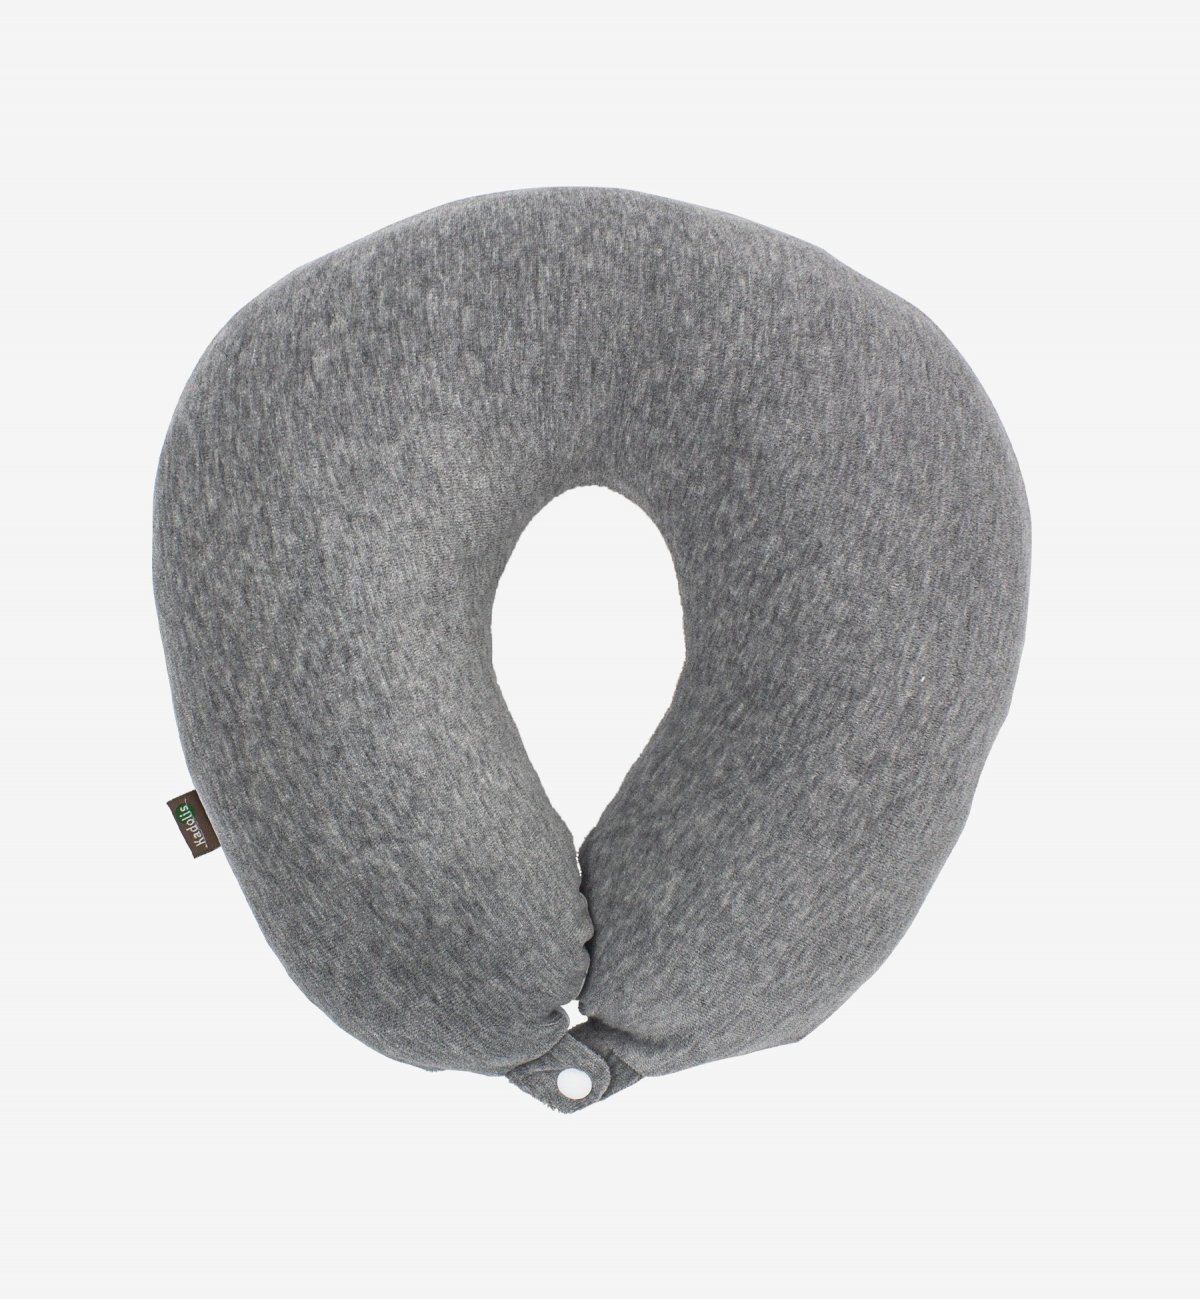 Adult travel pillow with organic cotton cover